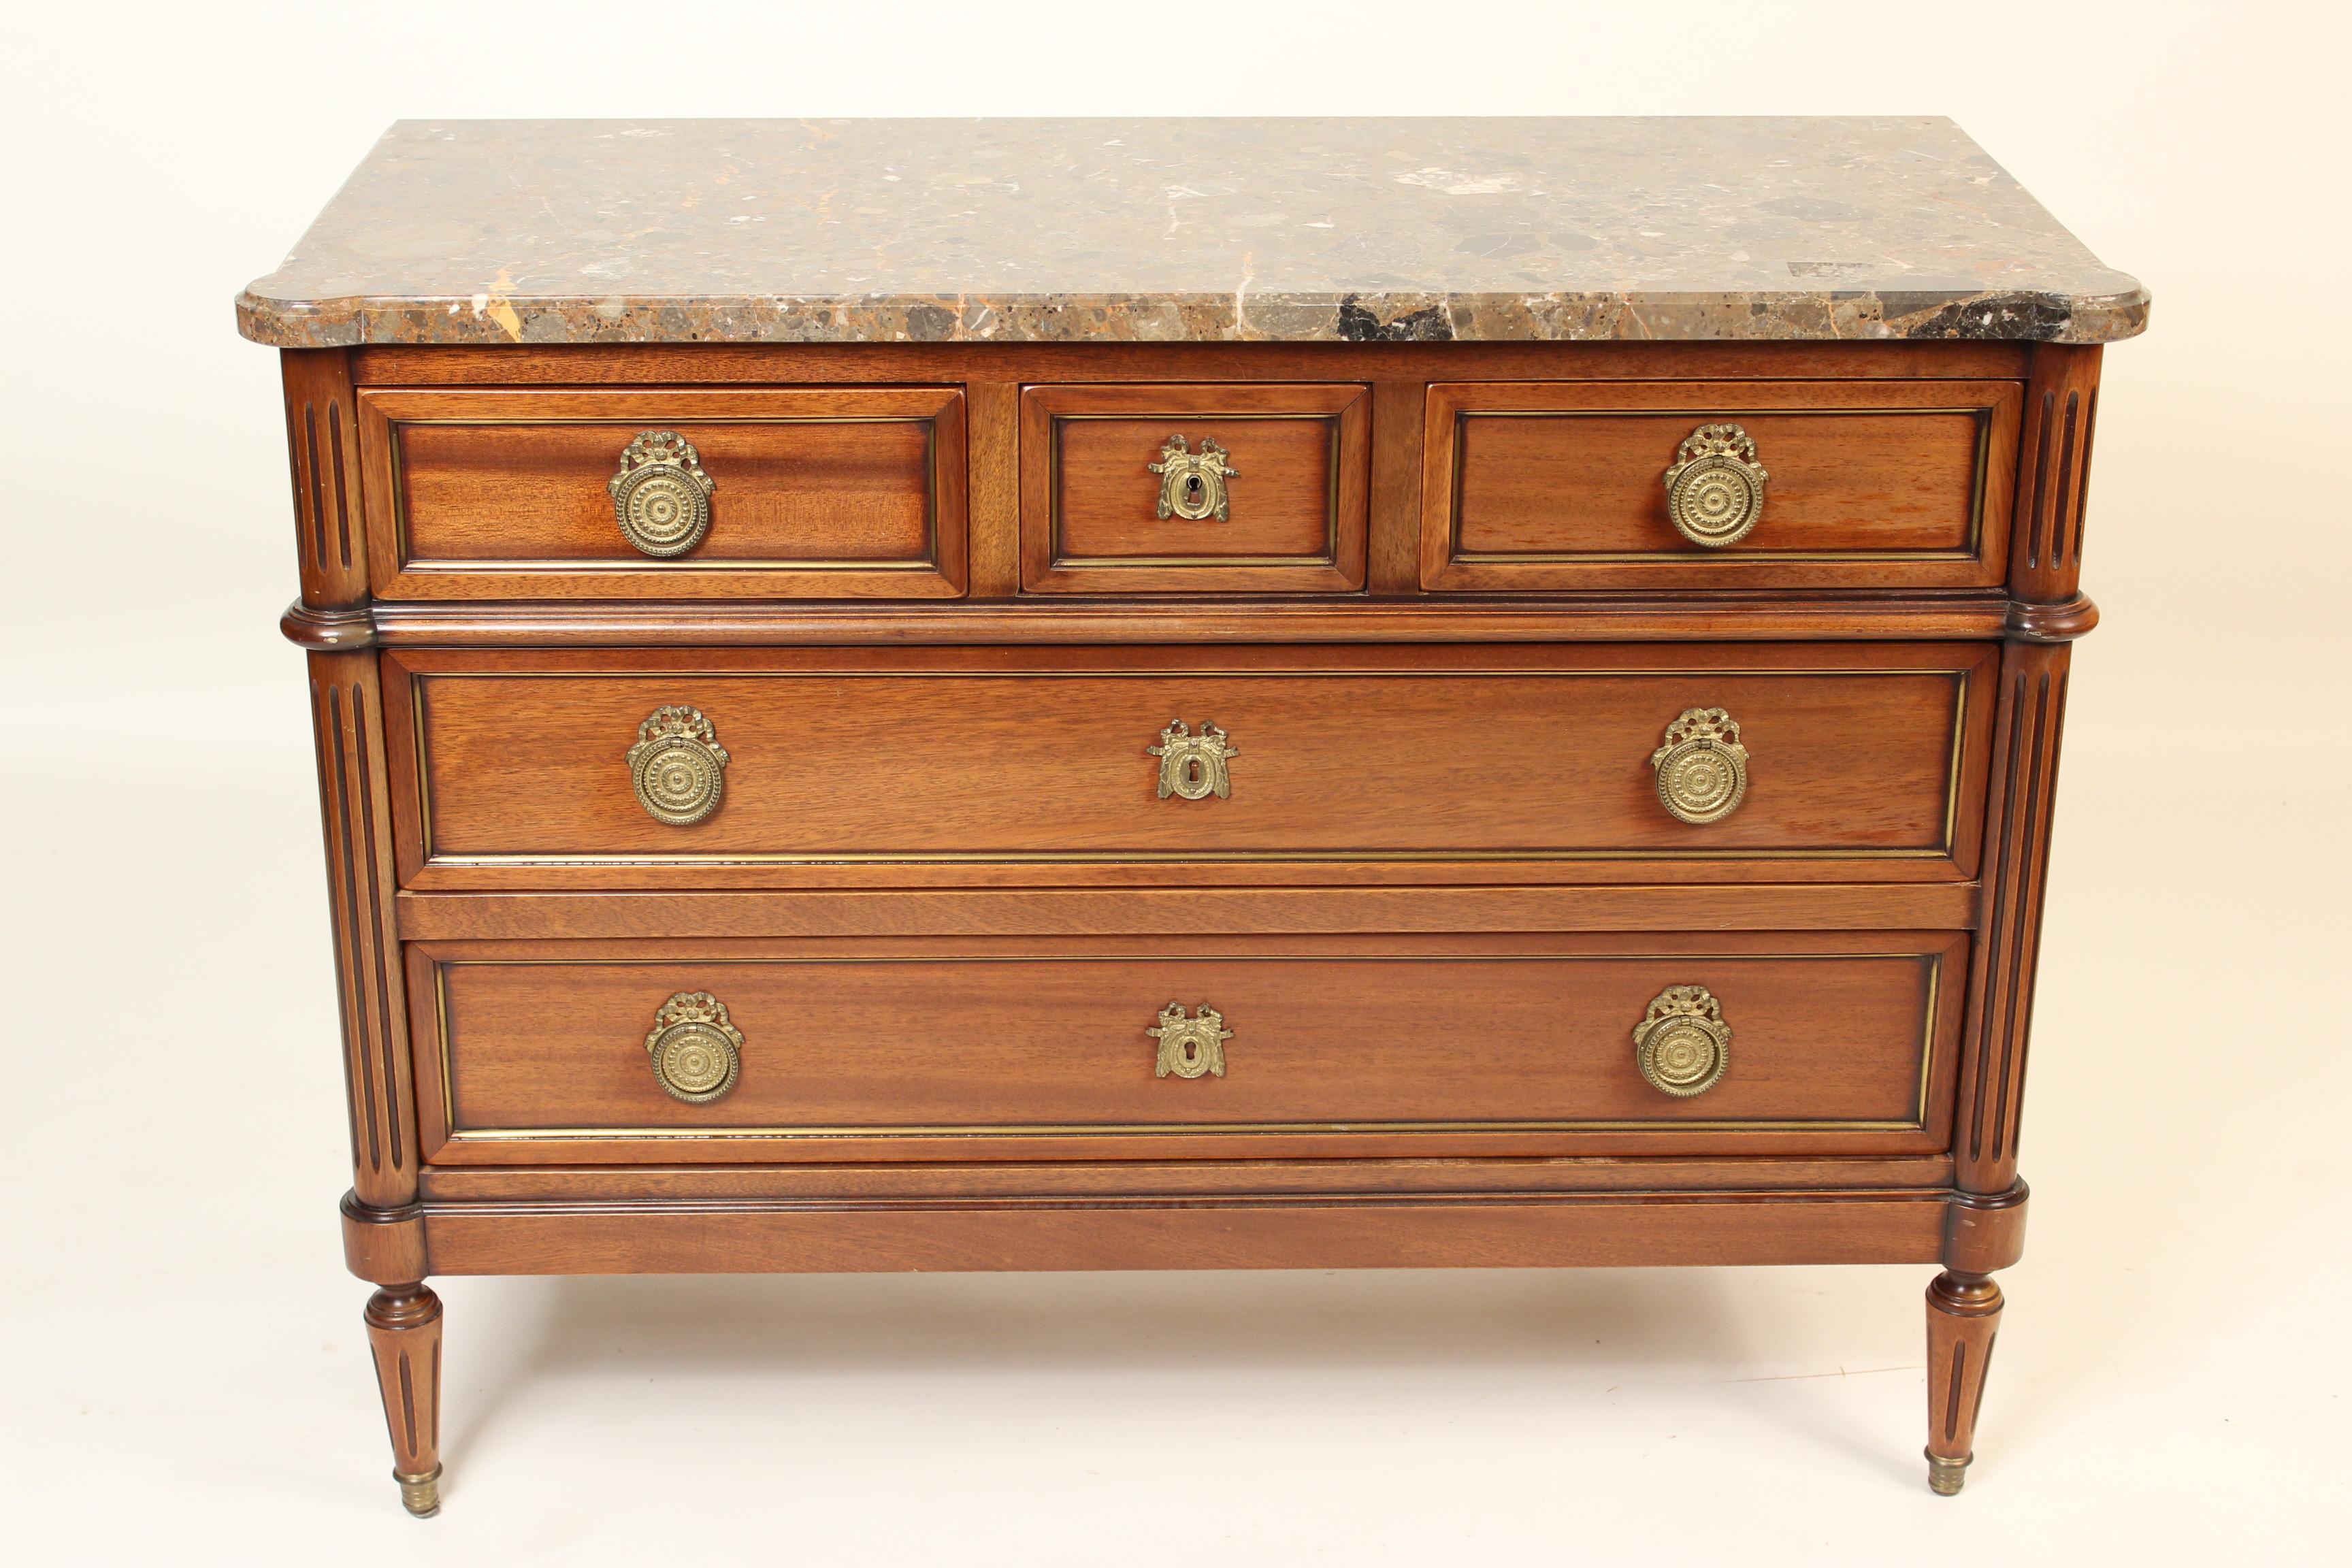 Louis XVI style mahogany chest of drawers with marble top and brass moldings on drawer fronts, circa 1980s.